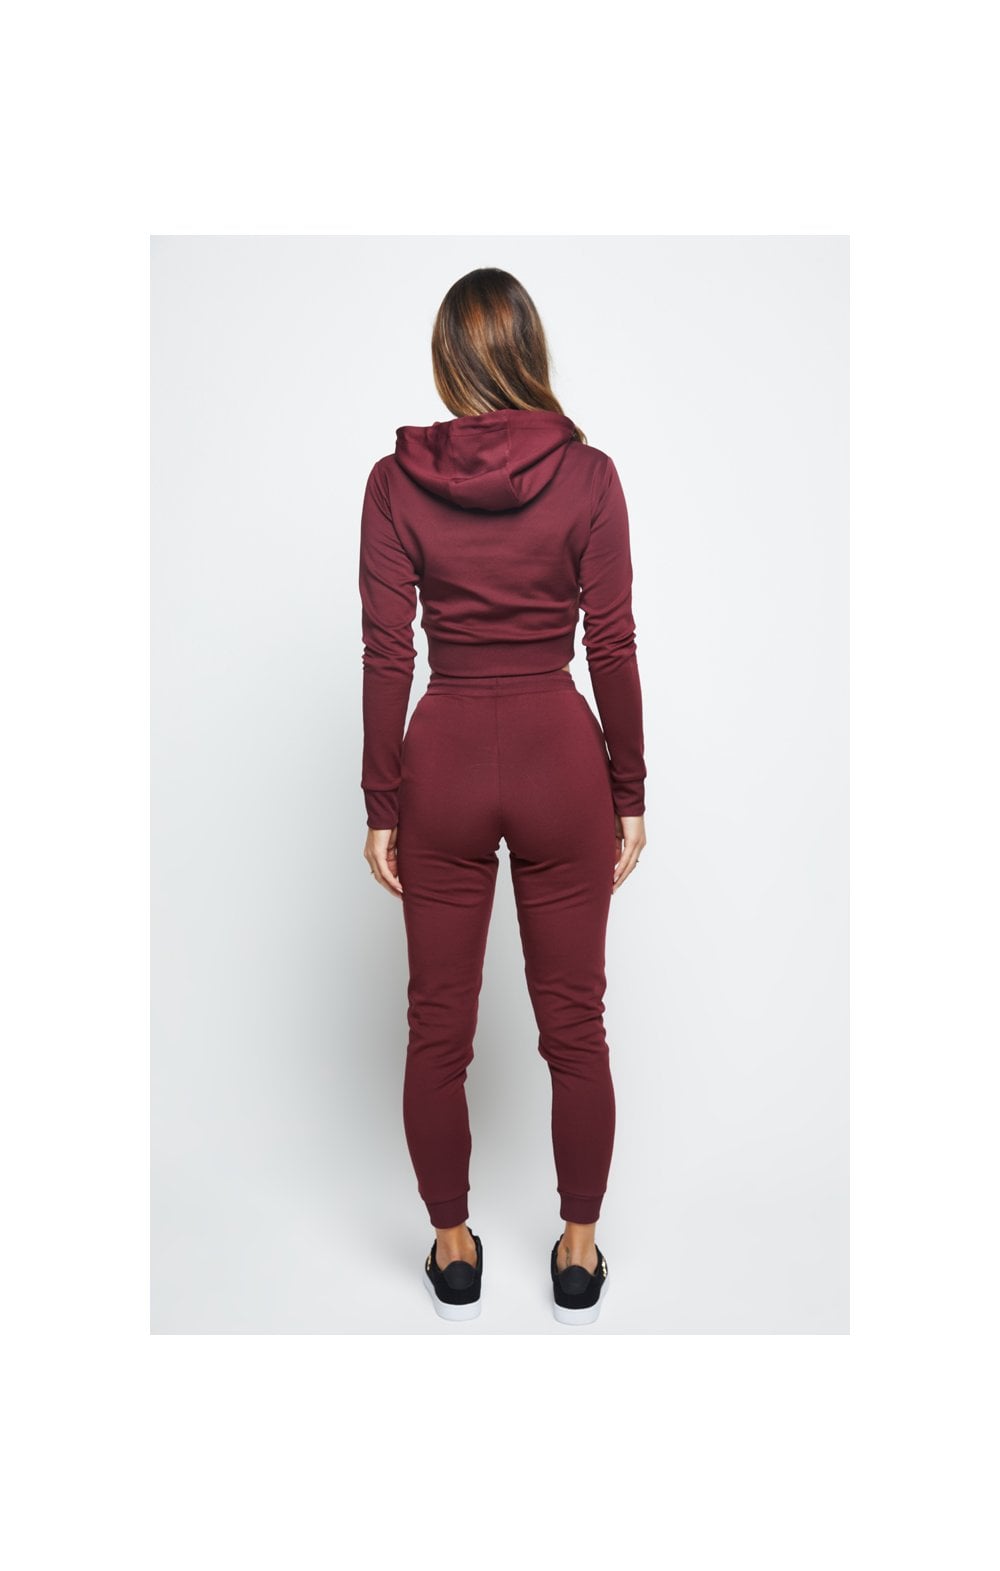 Load image into Gallery viewer, SikSilk Eyelet Mesh Track Top - Burgundy (6)